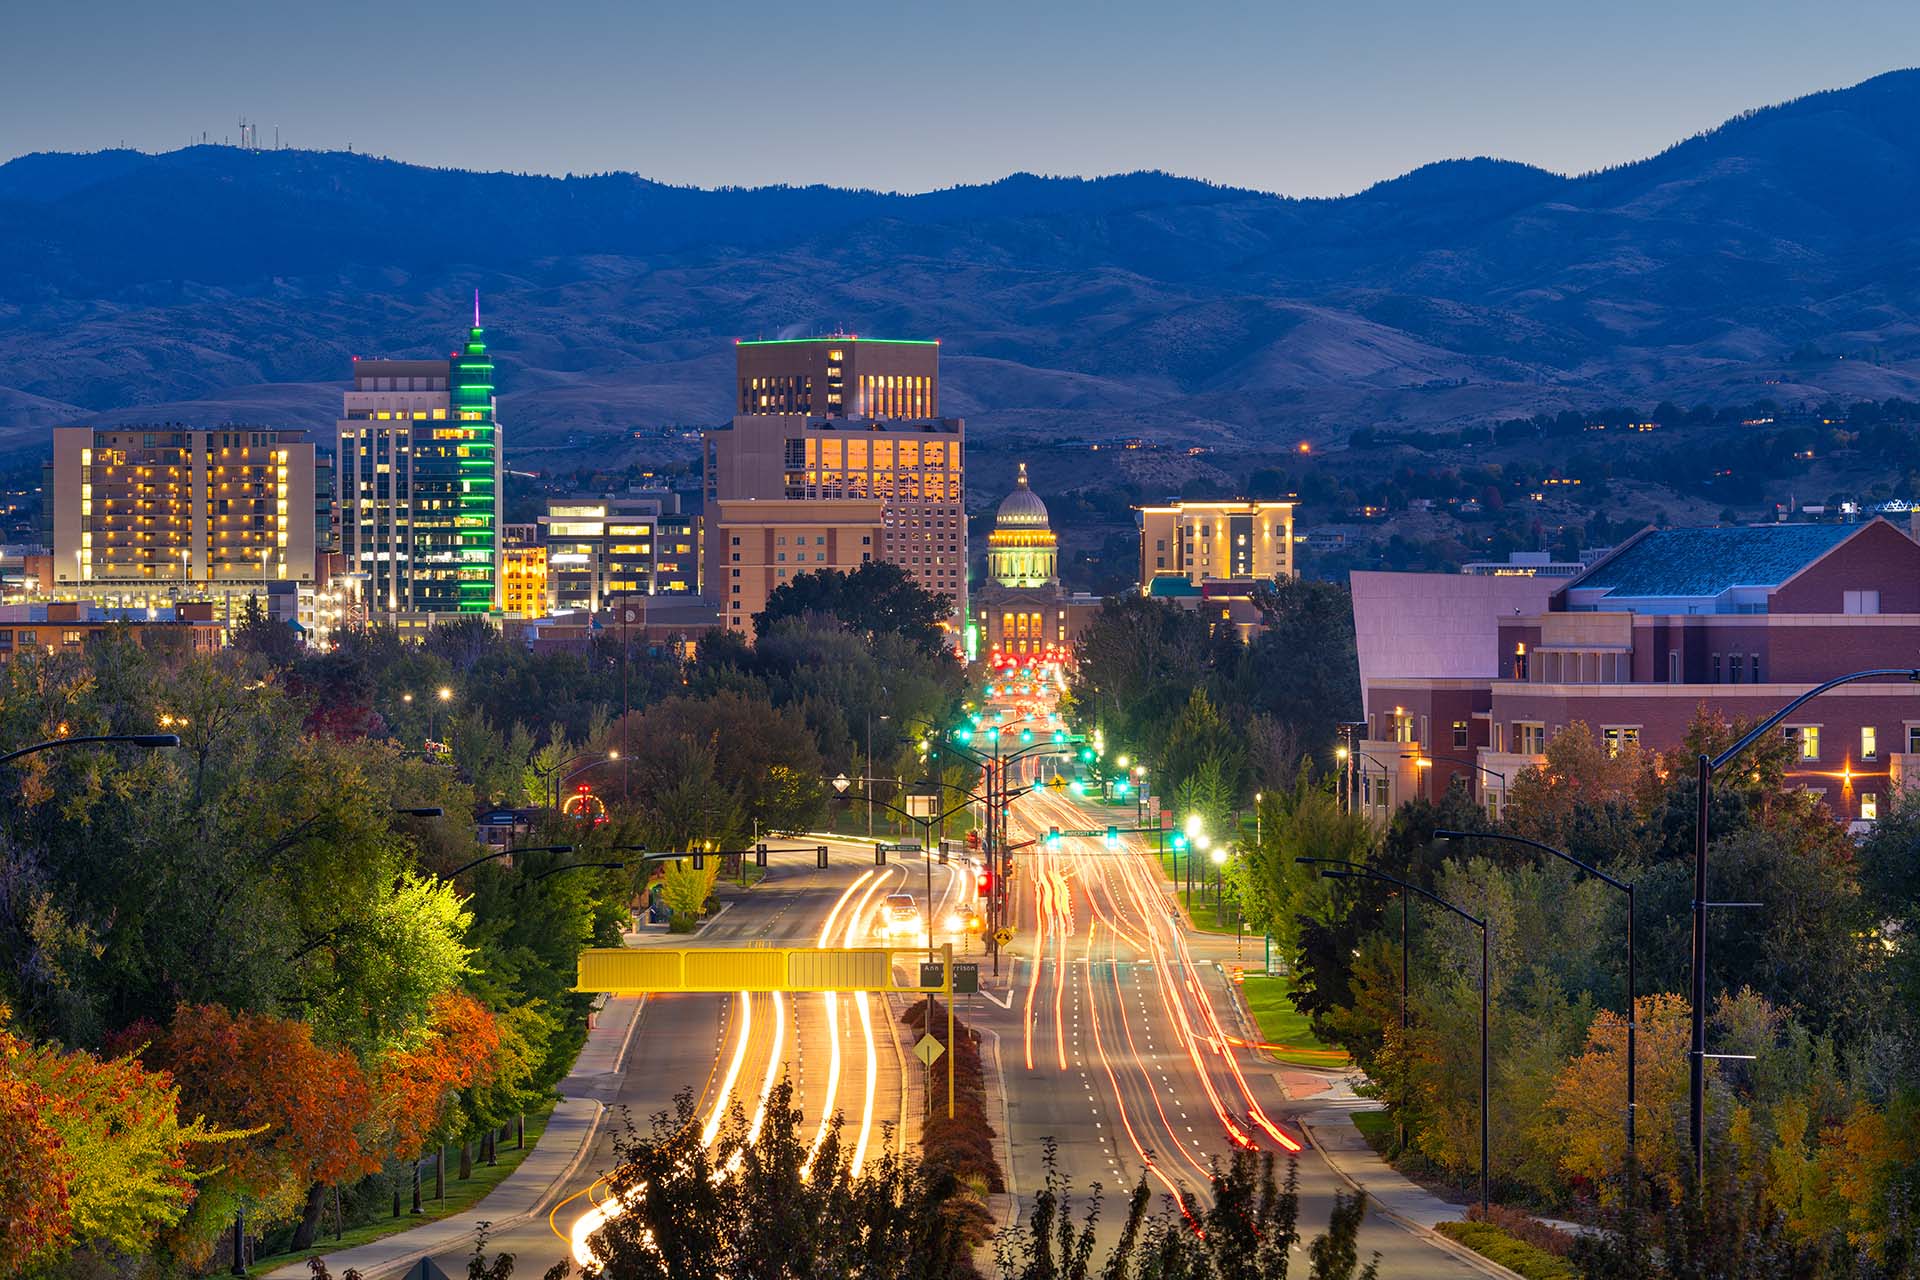 The city of Boise ID at dusk showing the lights of the city backdropped by the Boise foothills, a great place to live in 55 and older communities